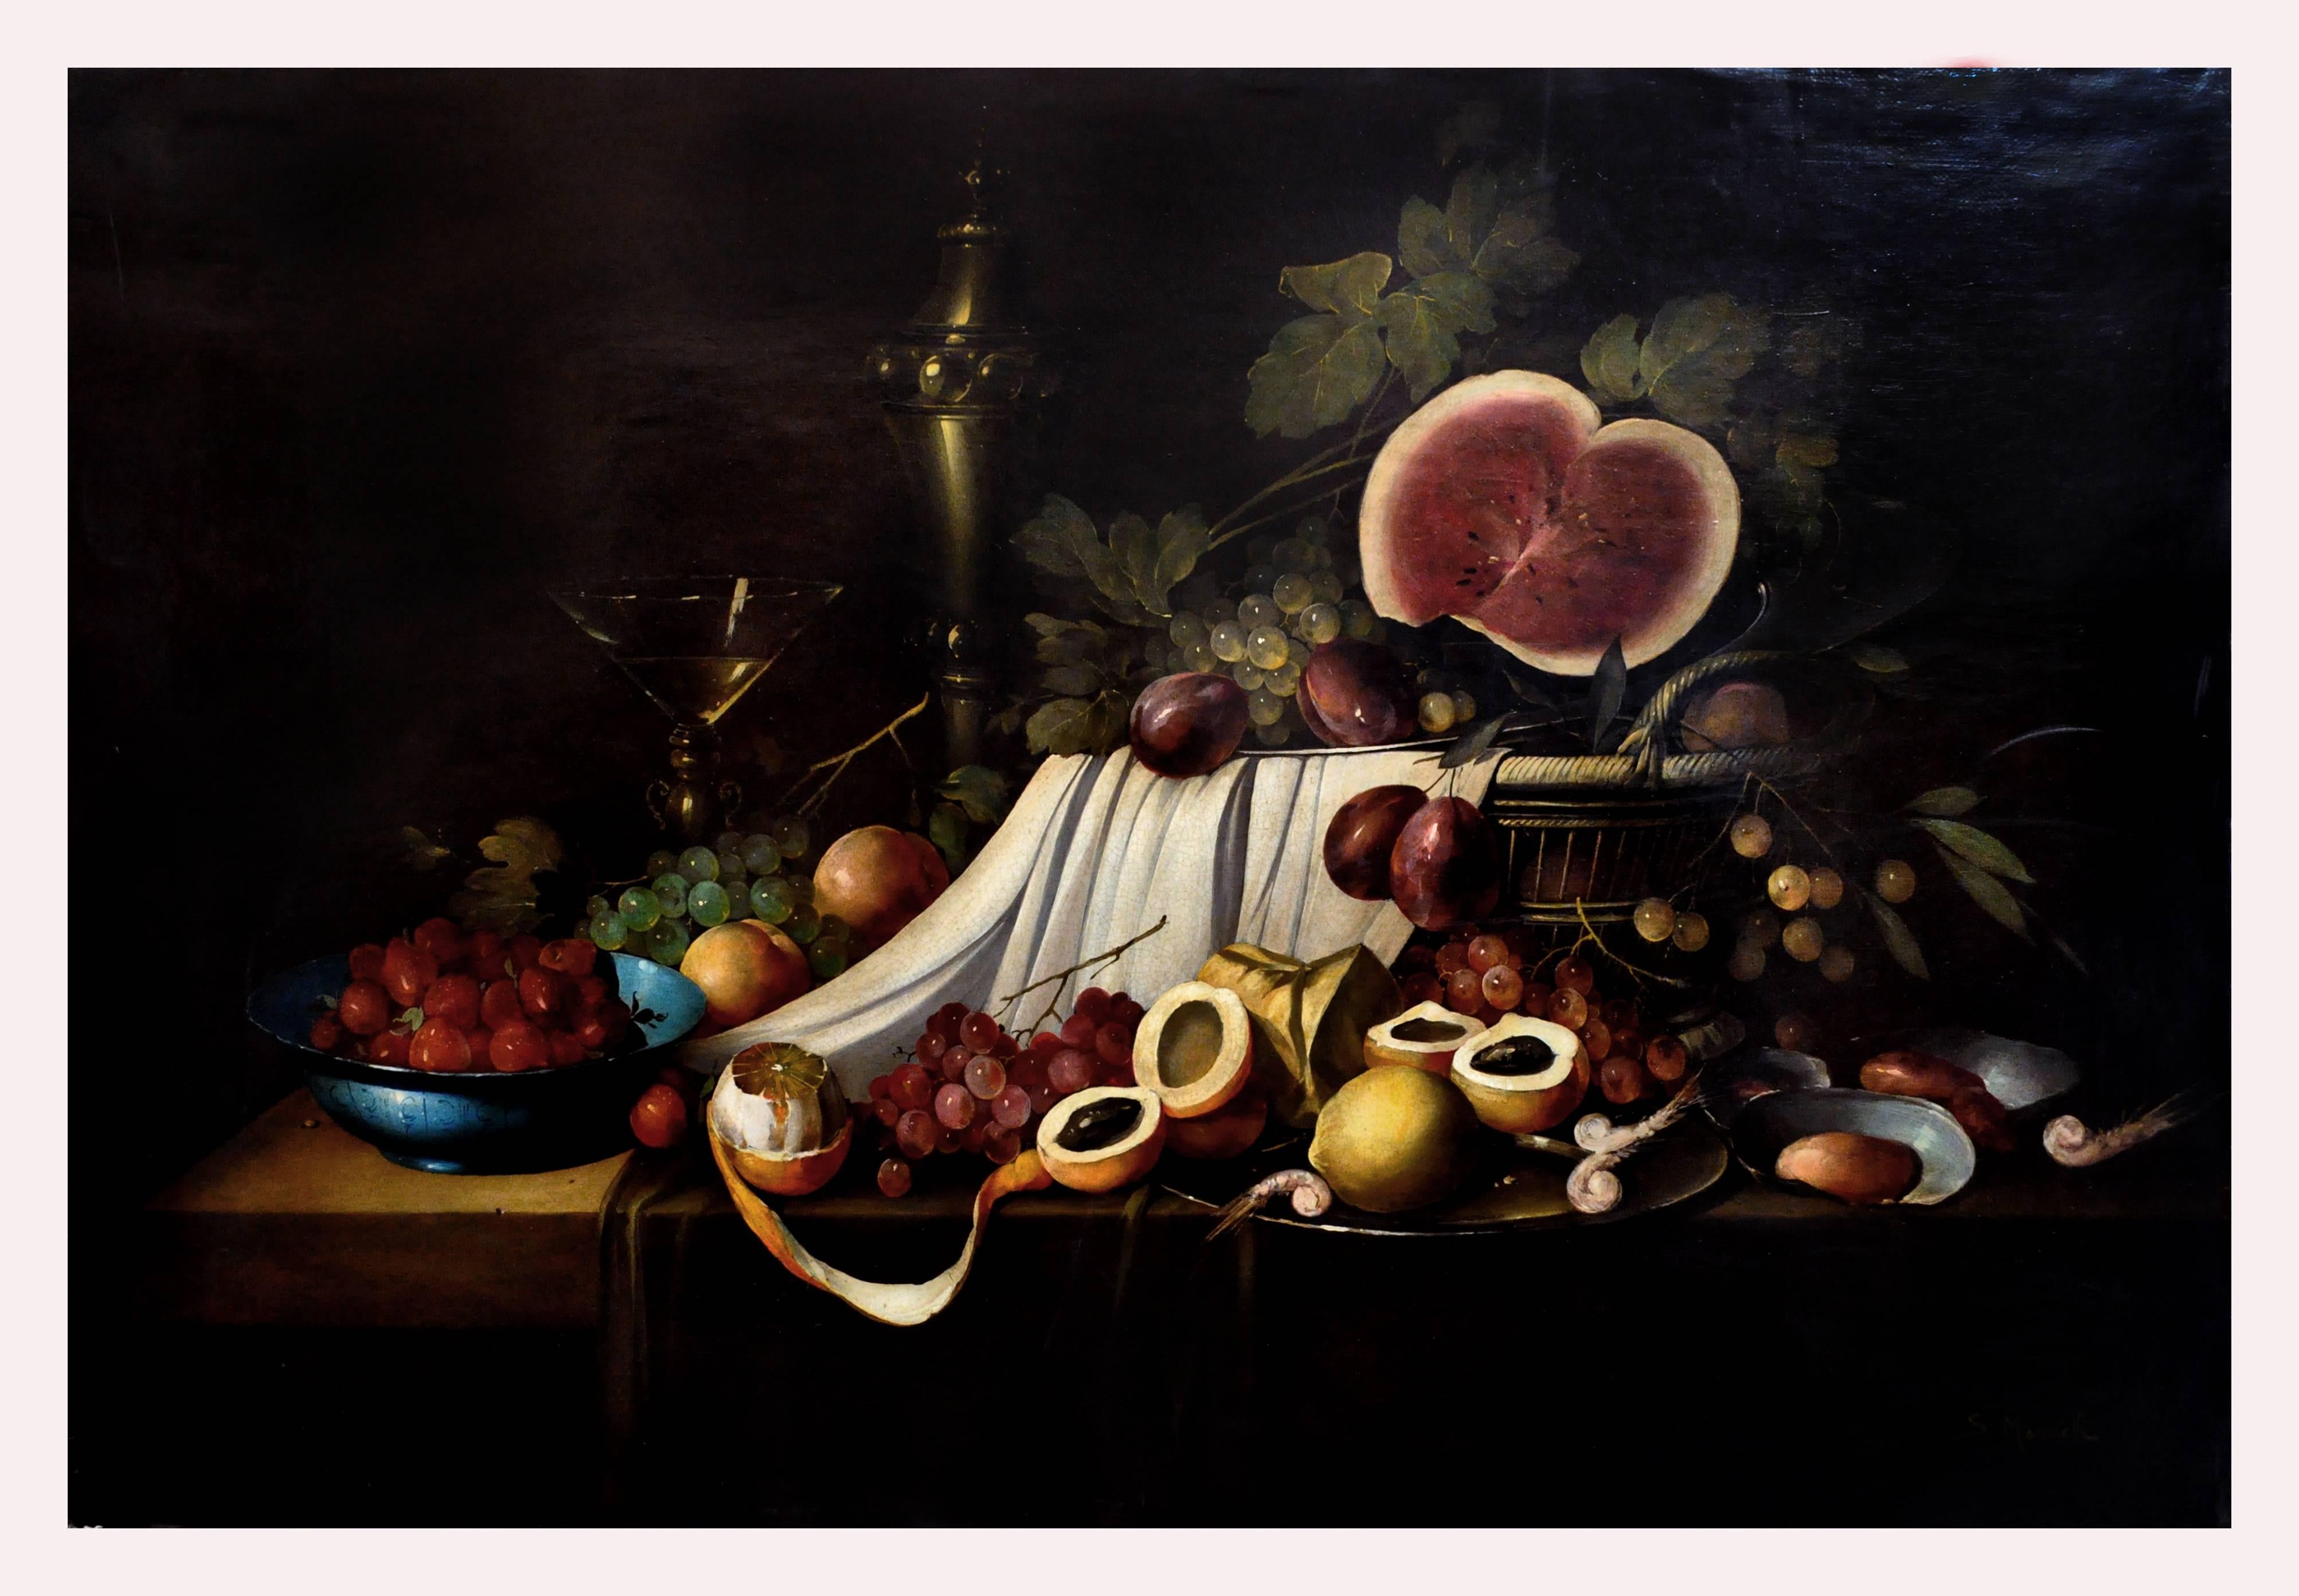 Still life - Salvatore Marinelli Italia 2008 - Oil on canvas cm.80x120
Frame available on request from our workshop